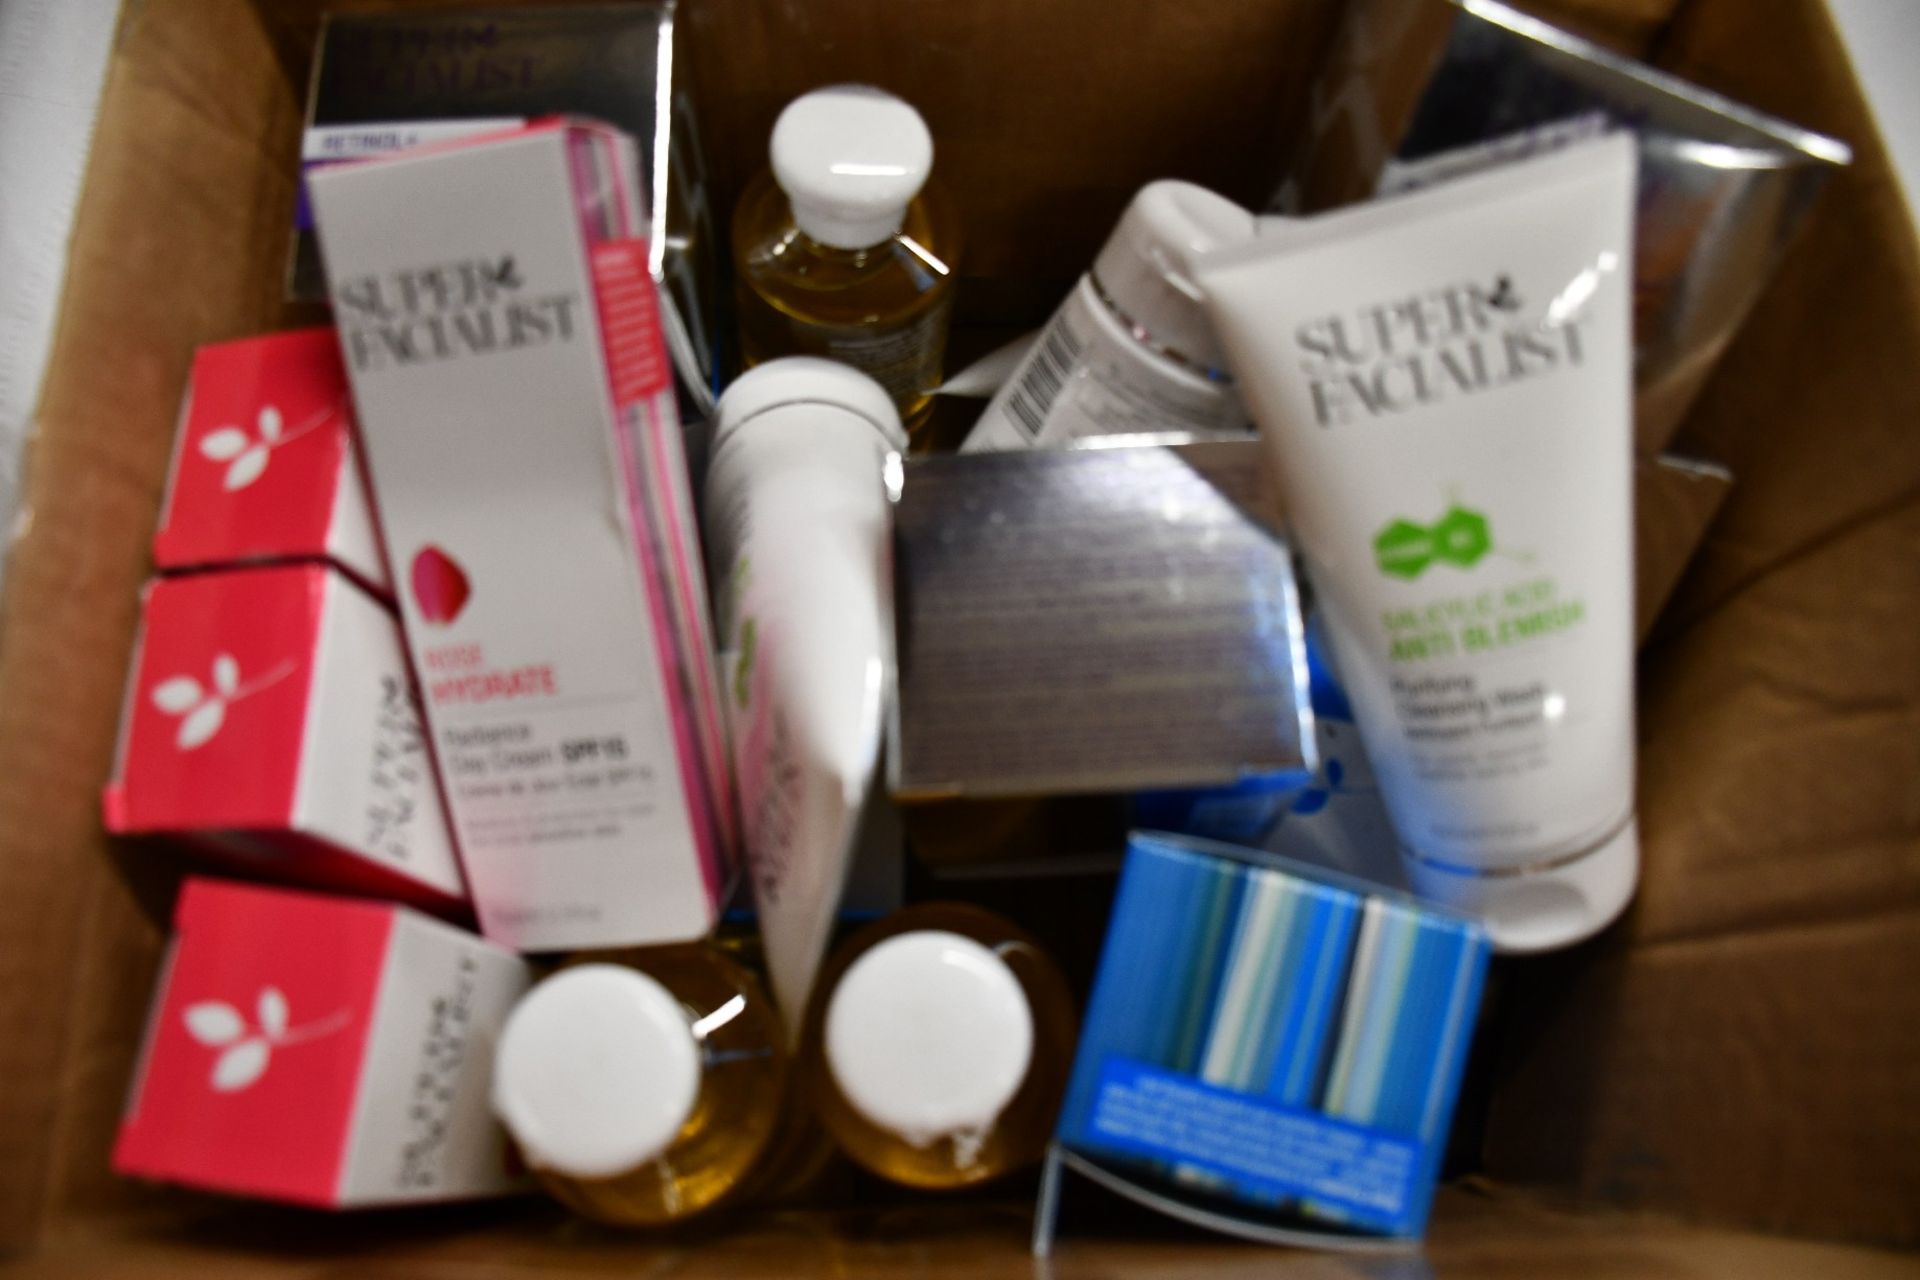 A quantity of Super Facialist beauty items to include Retinol anti ageing renewing day creams,